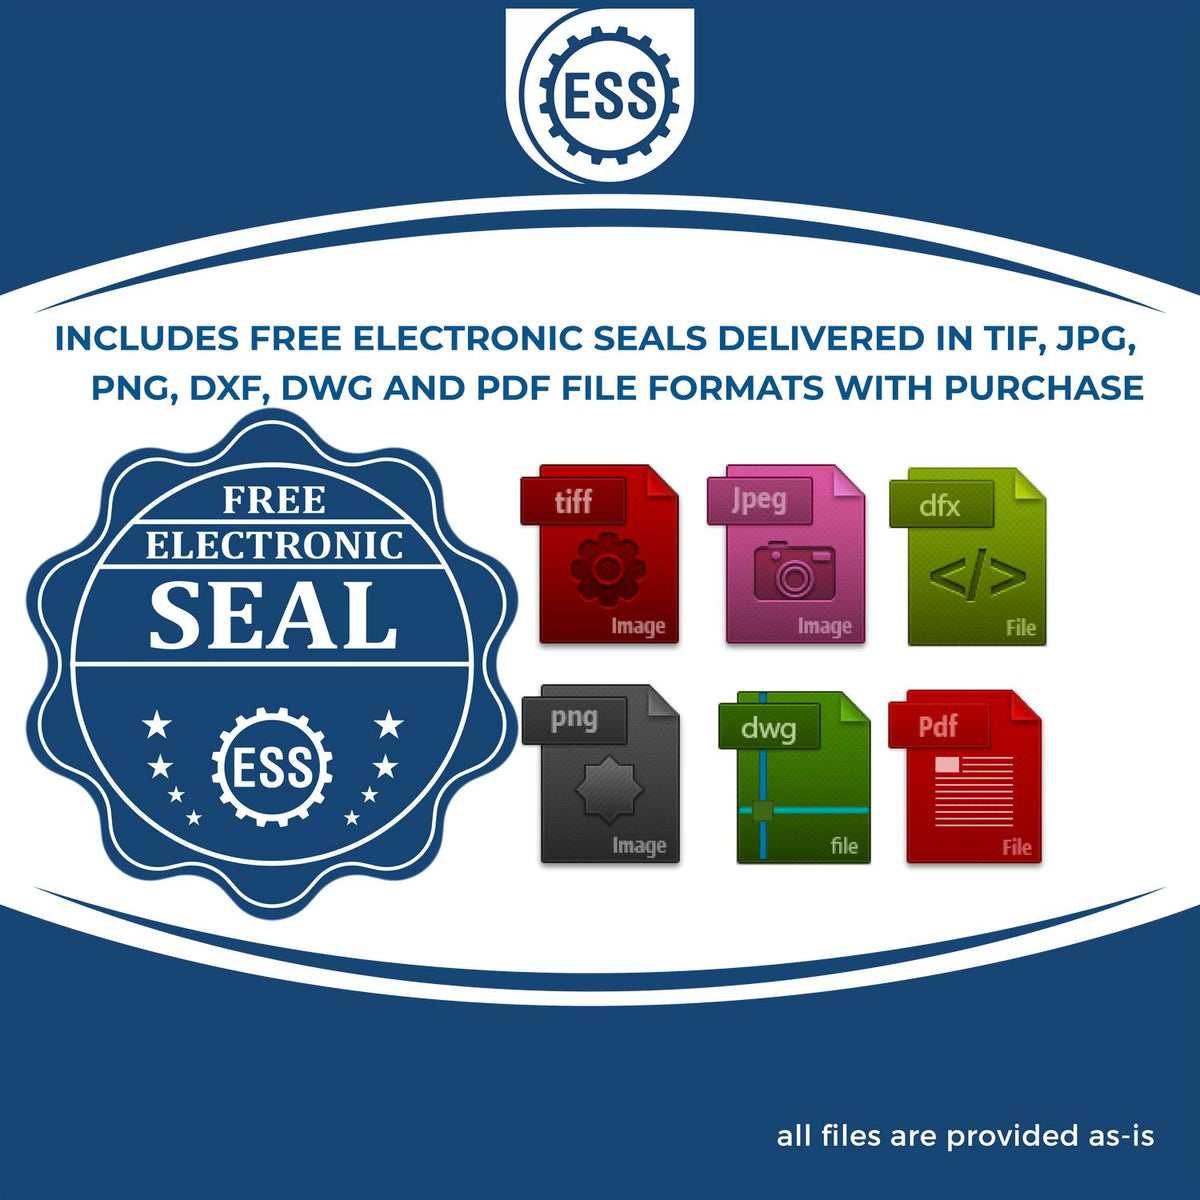 An infographic for the free electronic seal for the Gift Virginia Engineer Seal illustrating the different file type icons such as DXF, DWG, TIF, JPG and PNG.